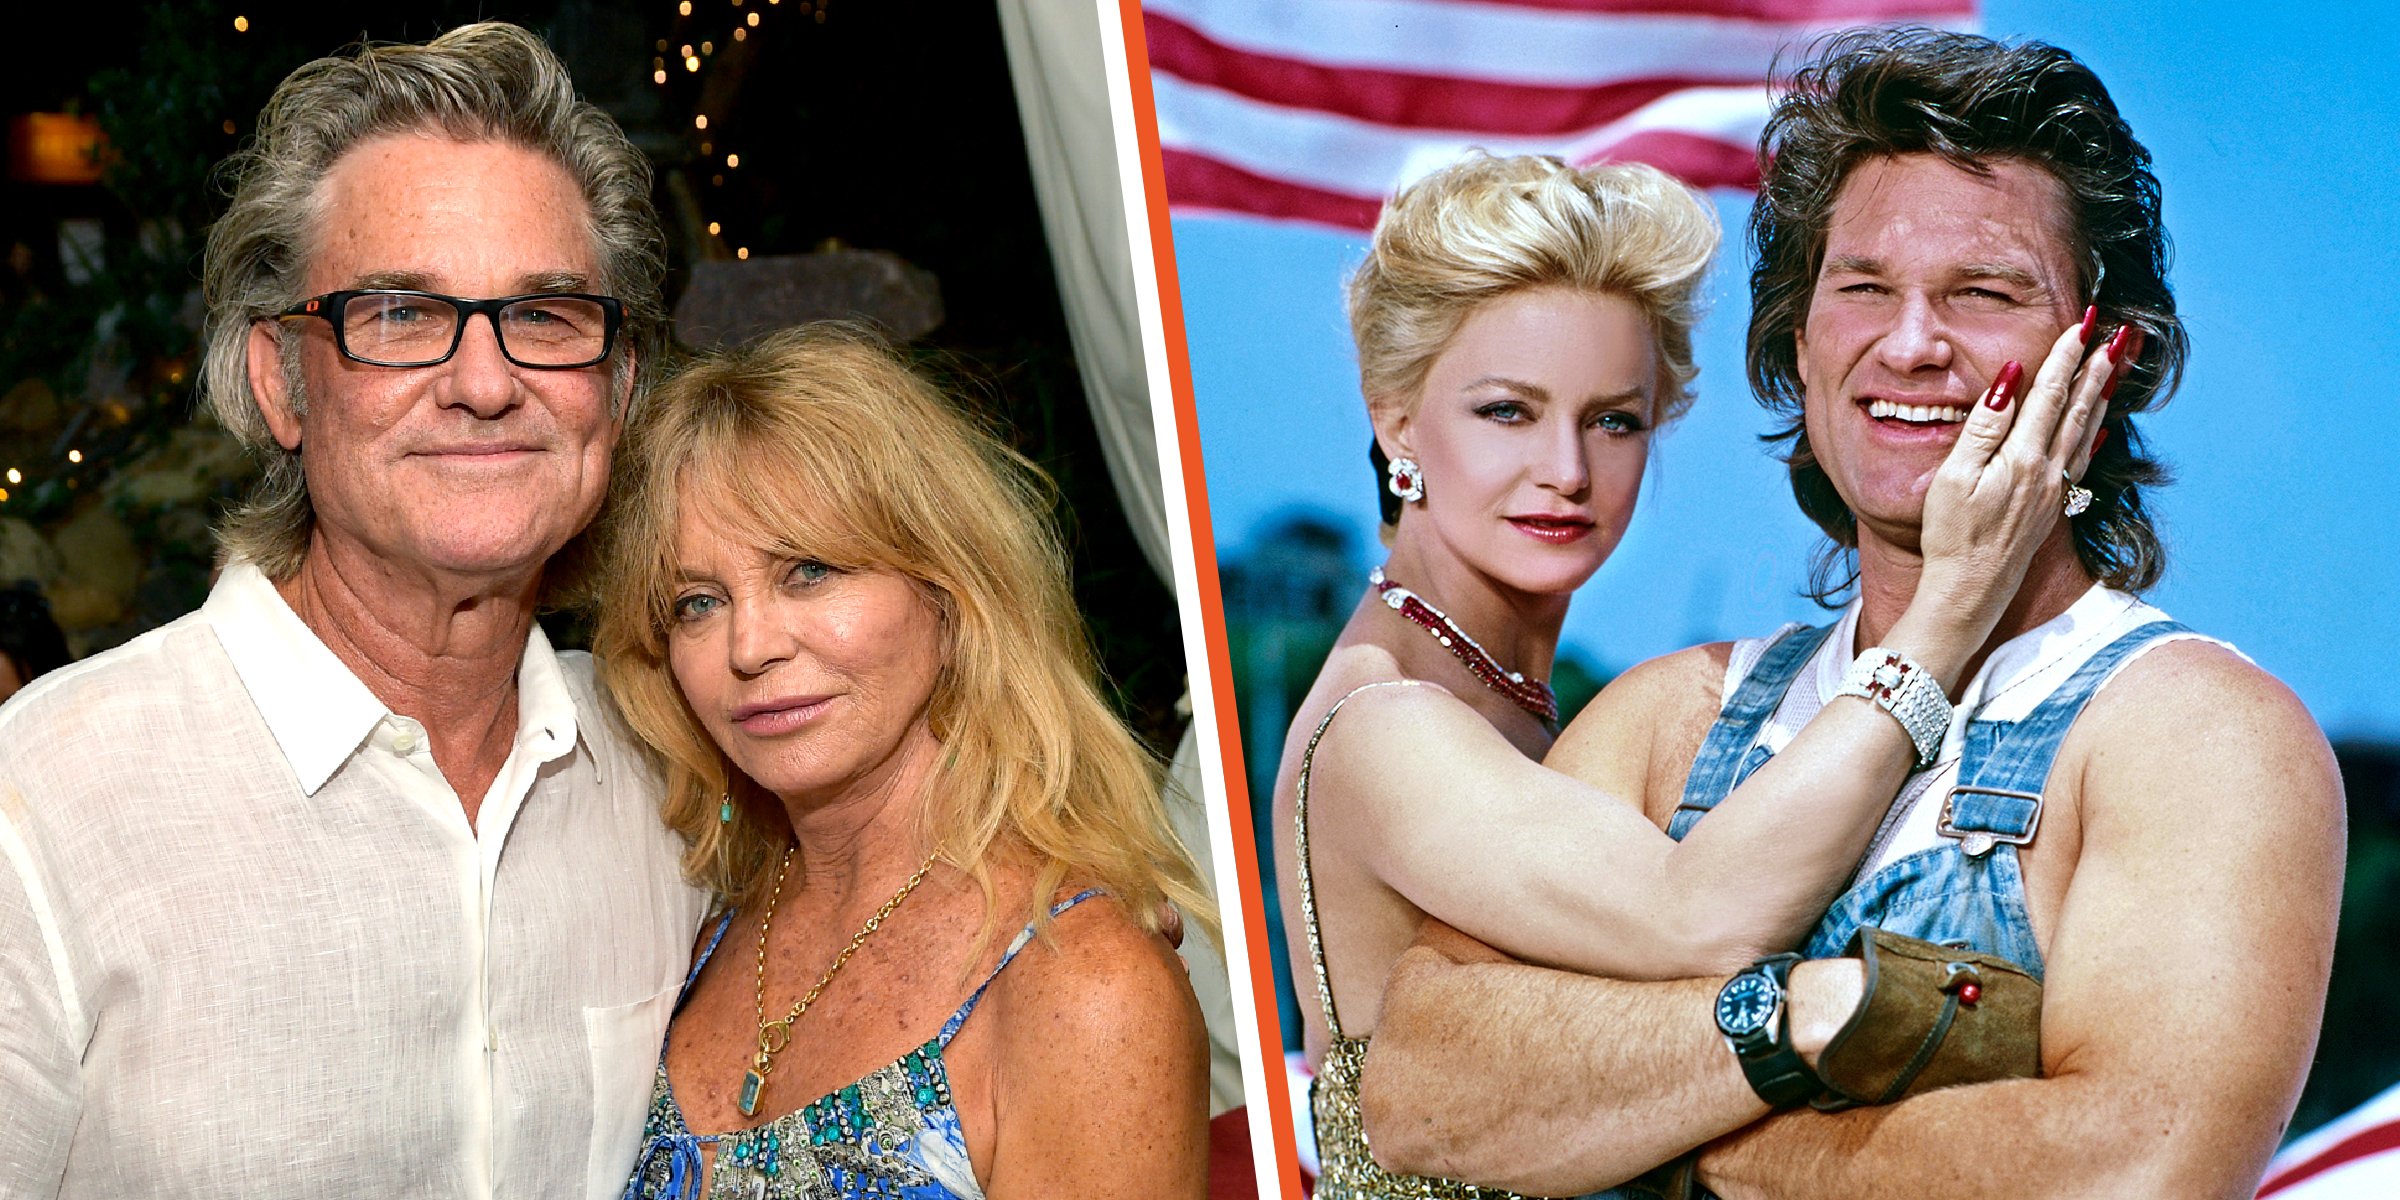 Kurt Russell and Goldie Hawn | Goldie Hawn and Kurt Russell | Source: Getty Images